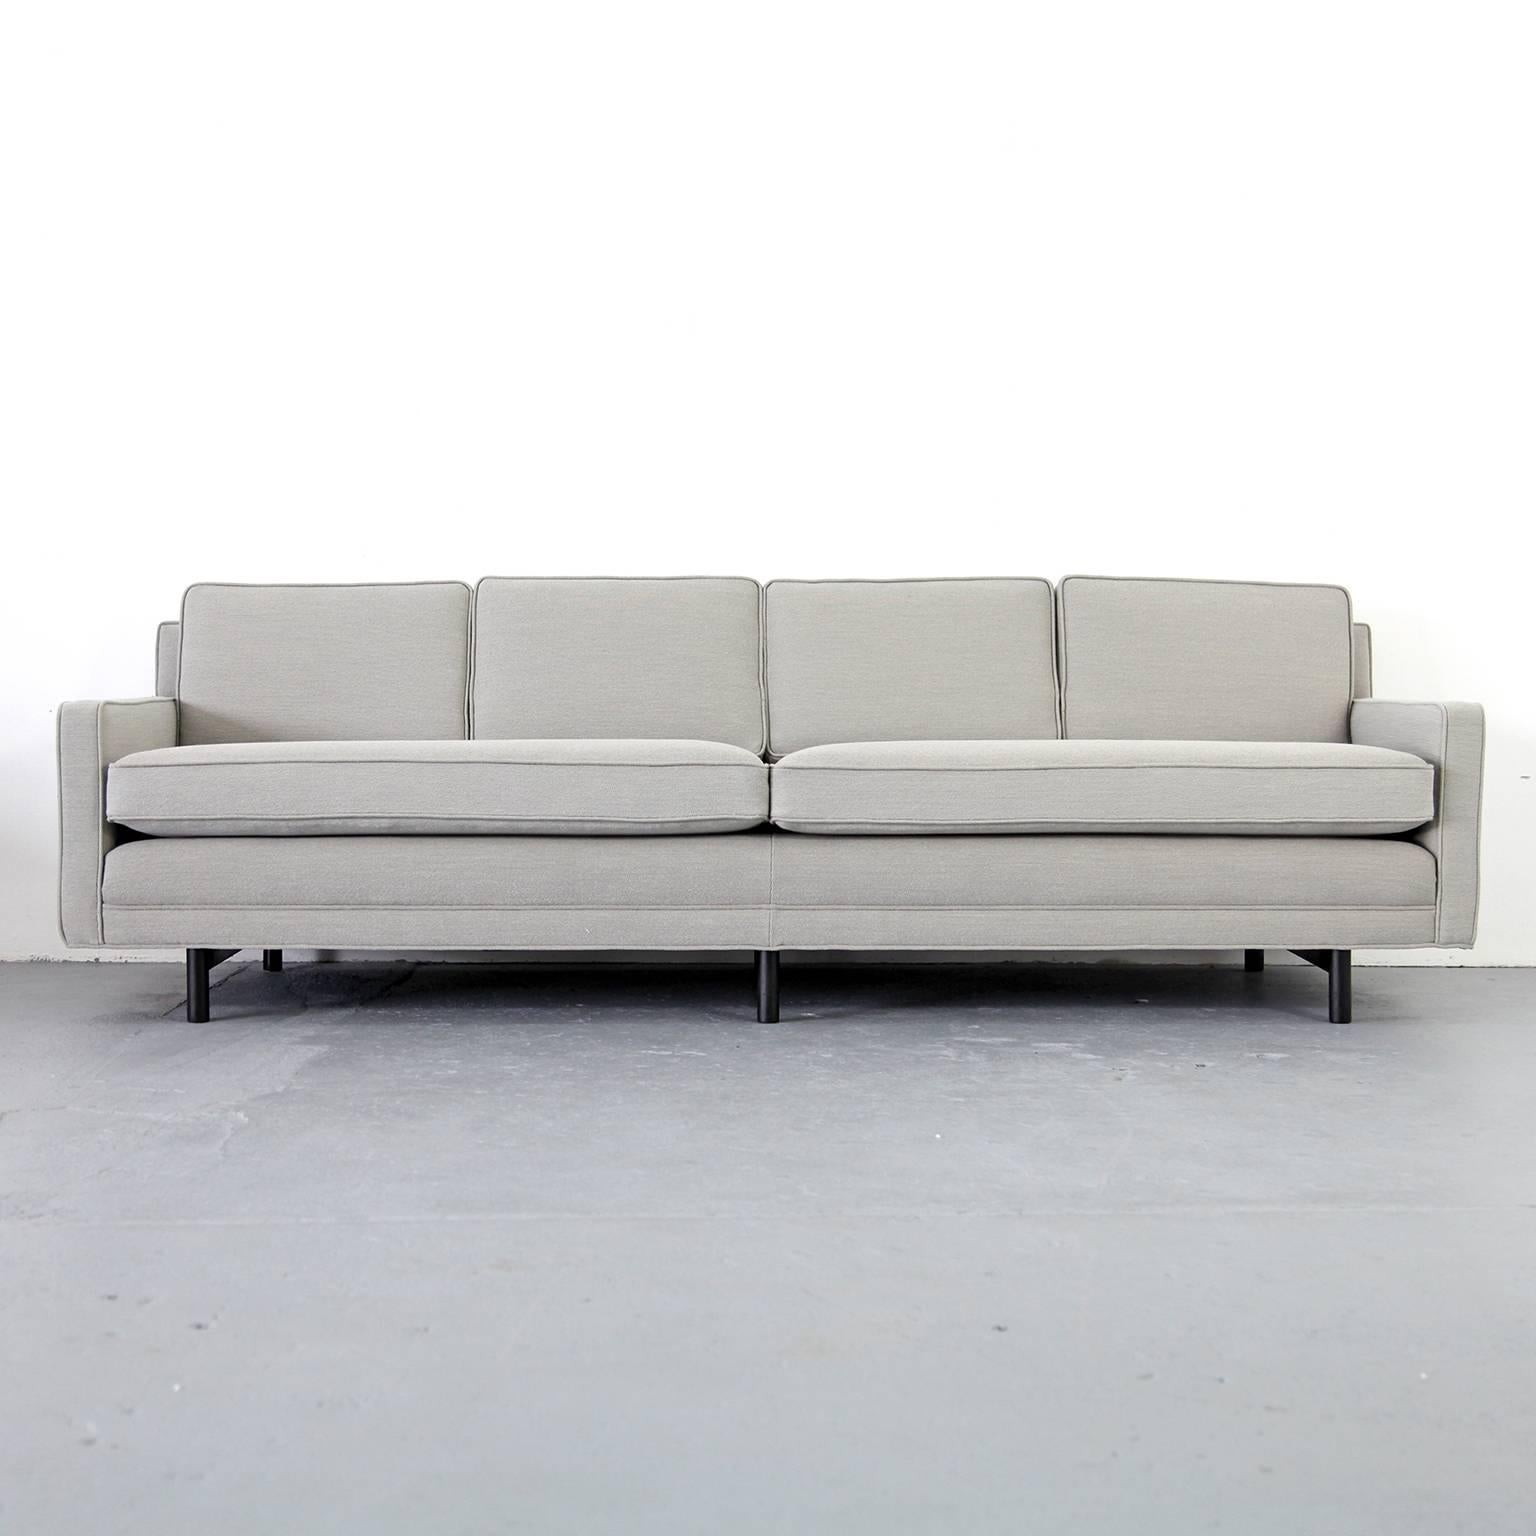 Great looking four-seat sofa by Paul McCobb. This comfortable sofa has completely been restored and re-upholstered.